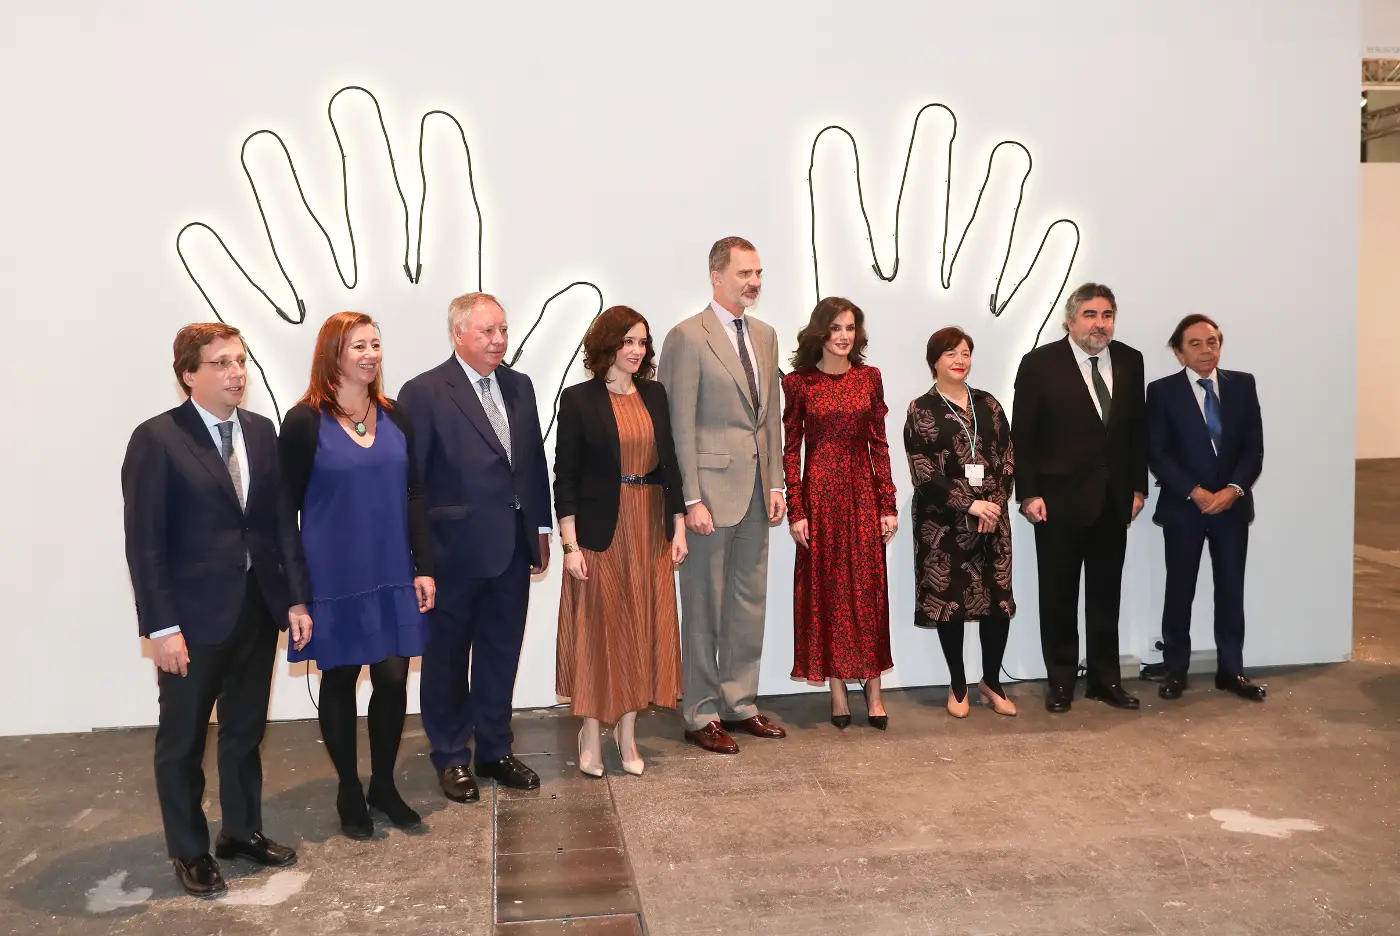 King Felipe and Queen Letizia attended the opening of Art Fair